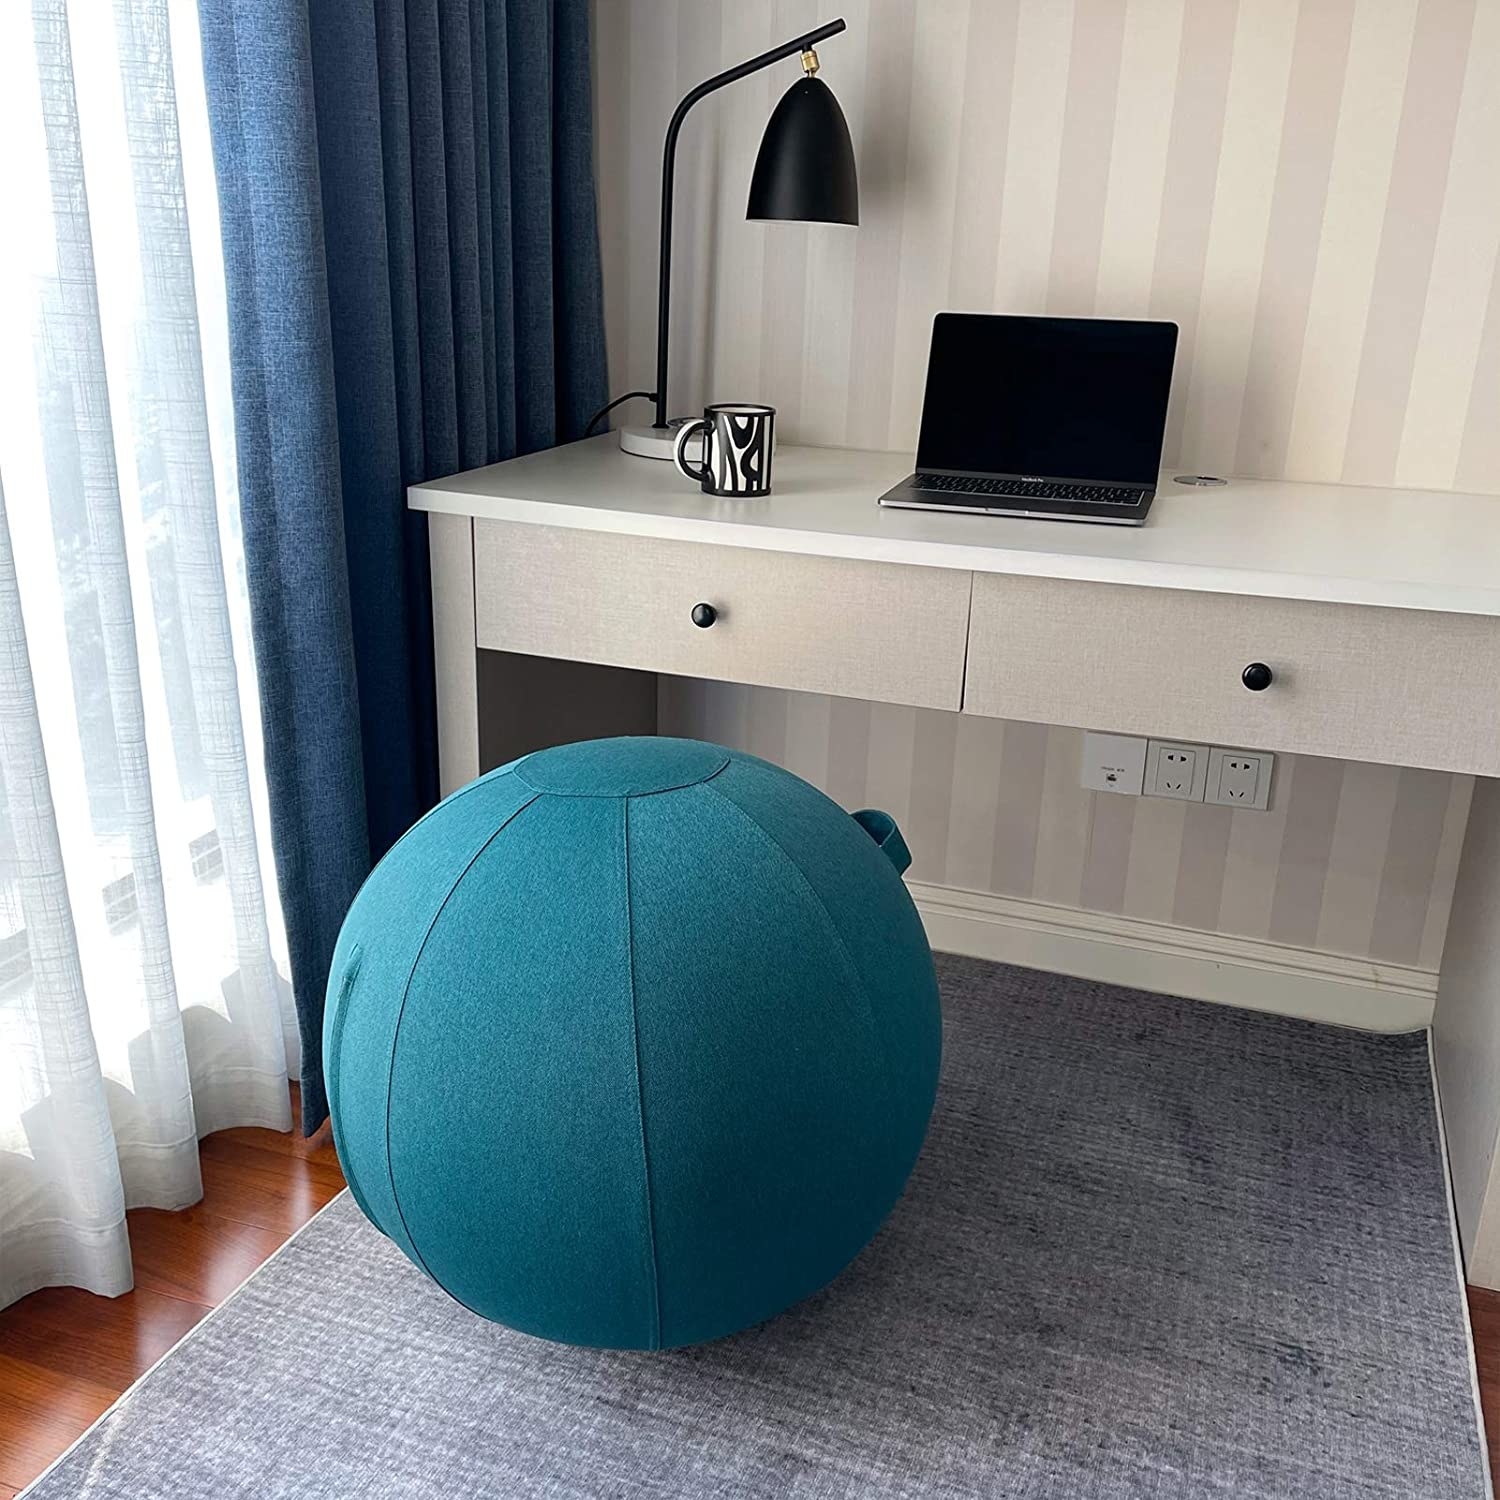 The yoga ball in front of a desk